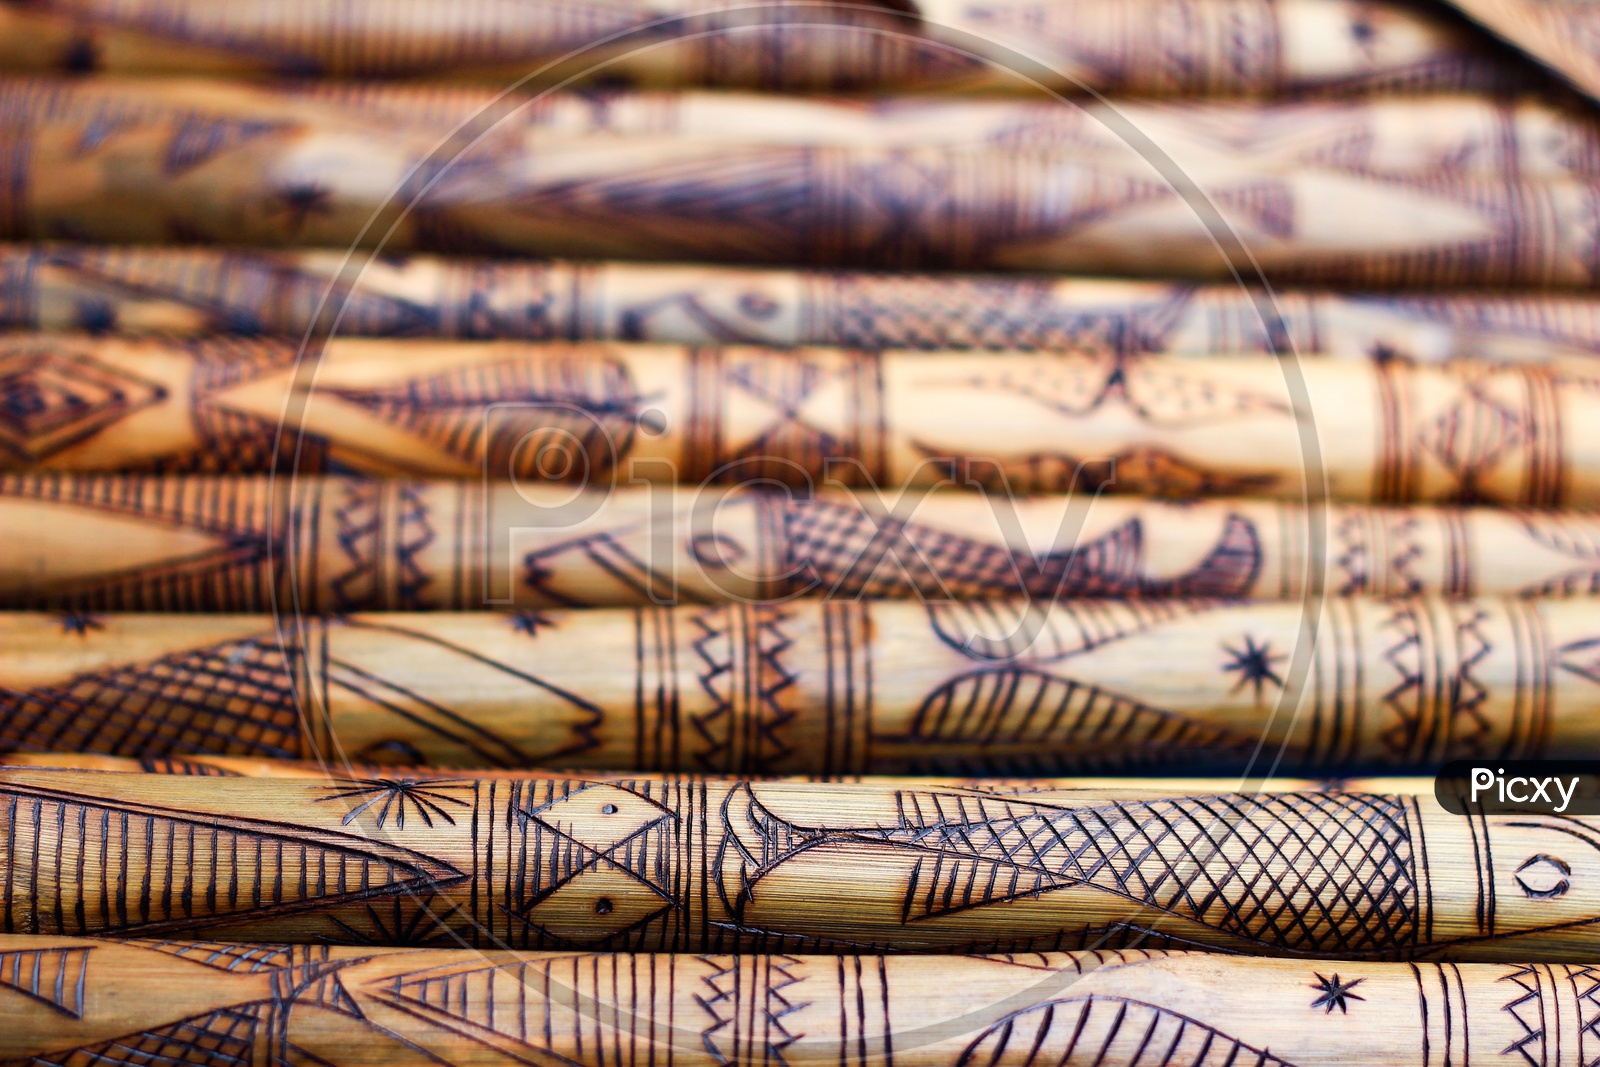 Hand Made Wooden Bamboo Carving Engraved Fish Figure Artwork On Bamboo, Rows Of Engraved Bamboo Sticks. Textured Background. Tribal Artwork.